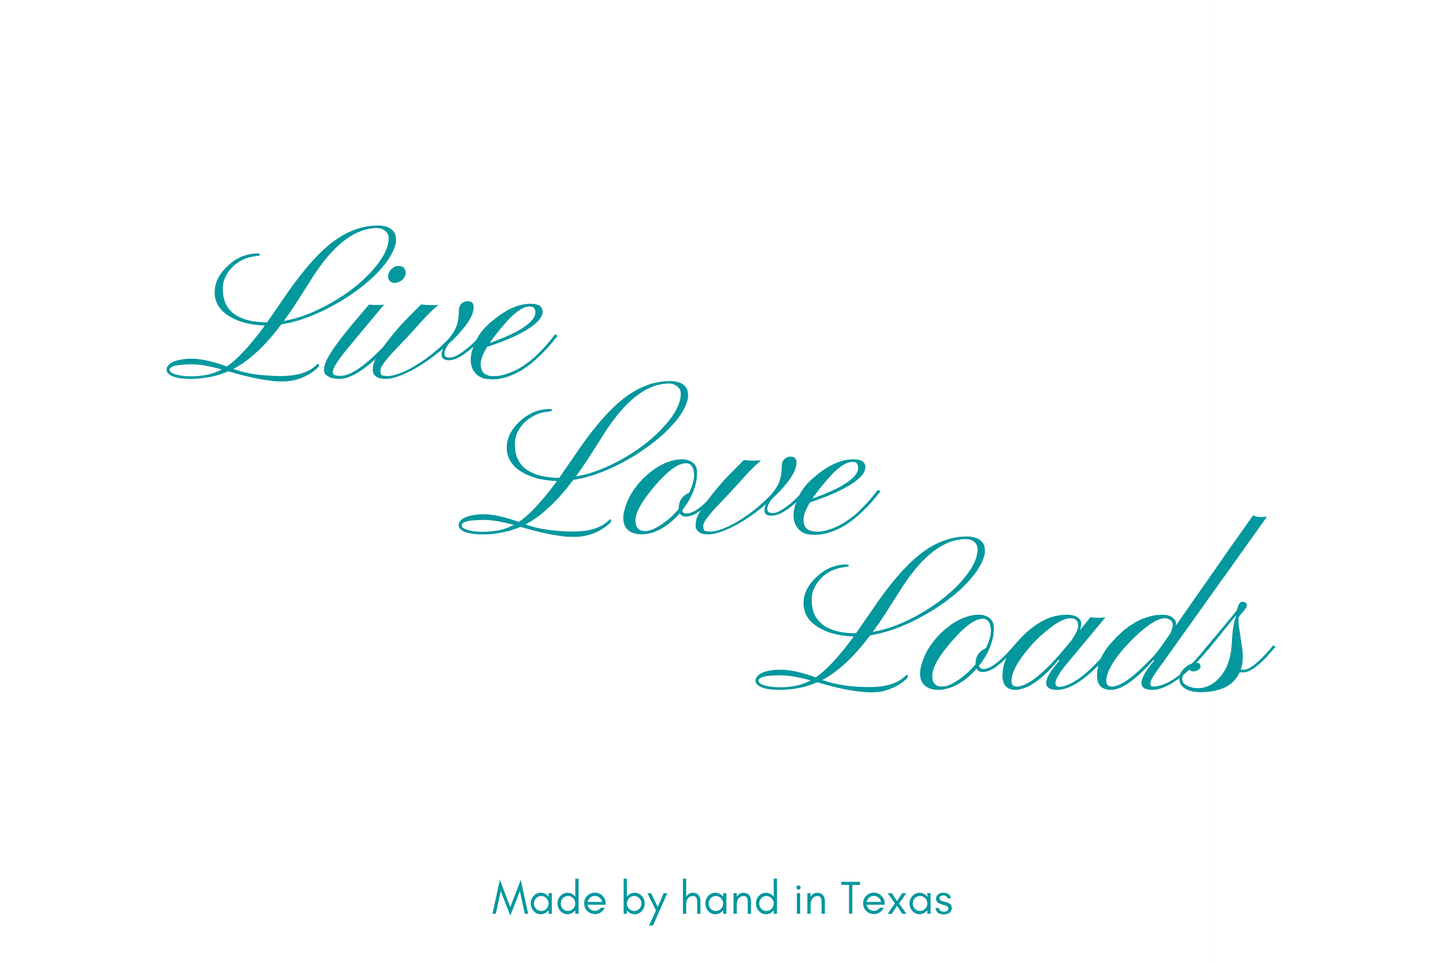 Live Love Loads - Naughty Candle